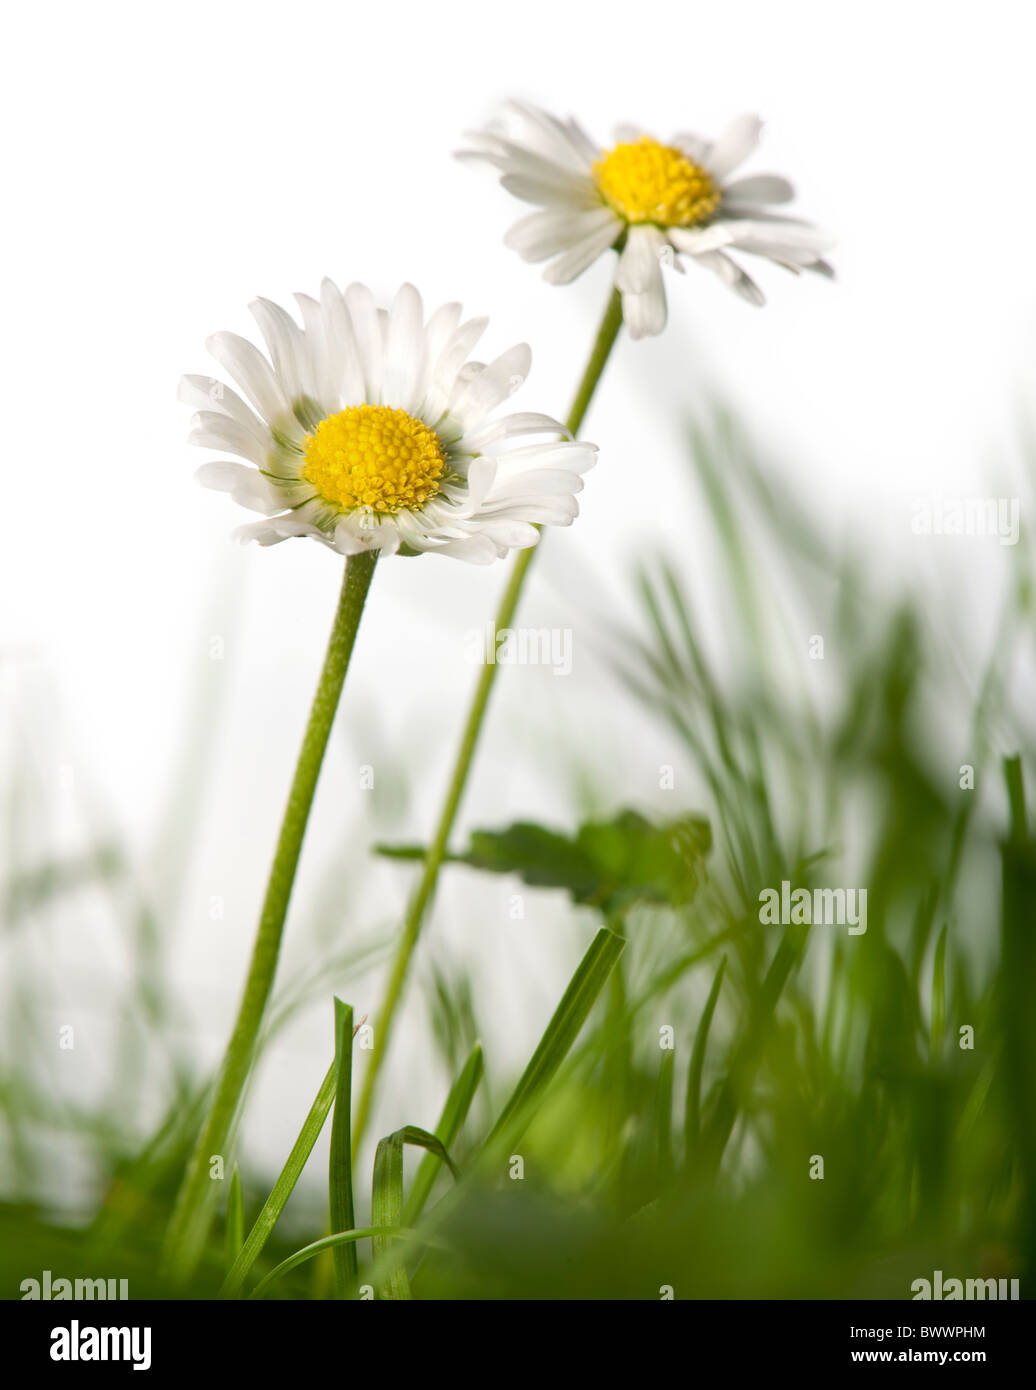 Daisies in grass in front of white background Stock Photo